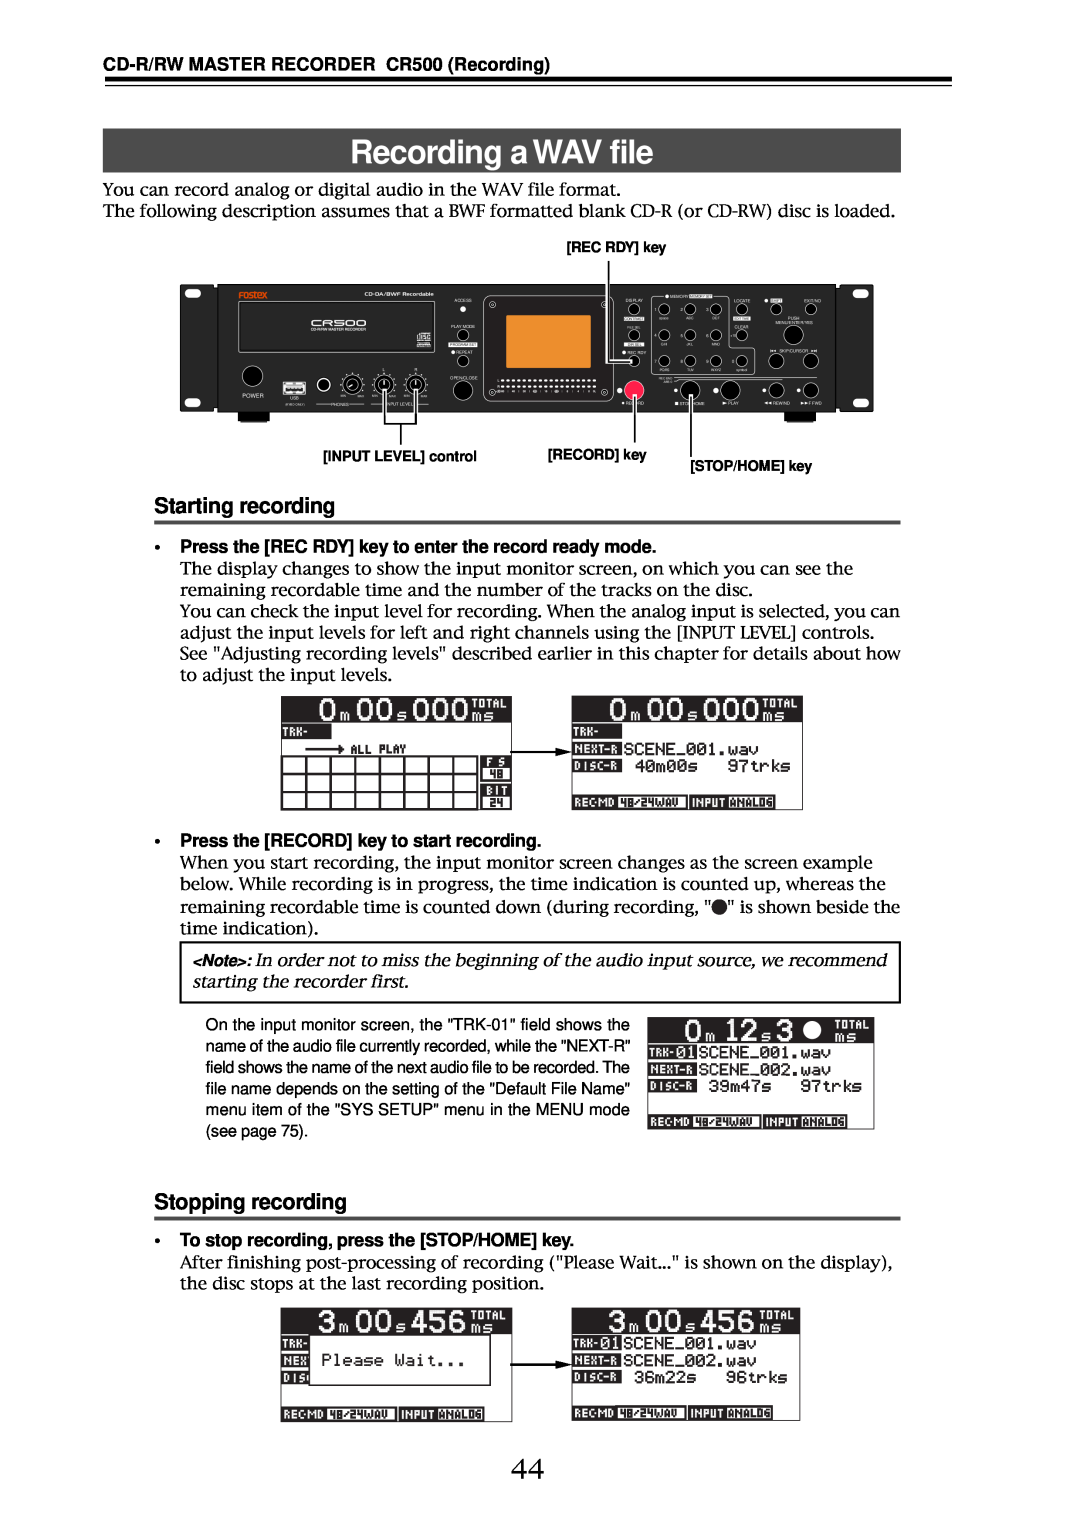 Fostex CR500 Recording a WAV file, Starting recording, Stopping recording, •Press the RECORD key to start recording 